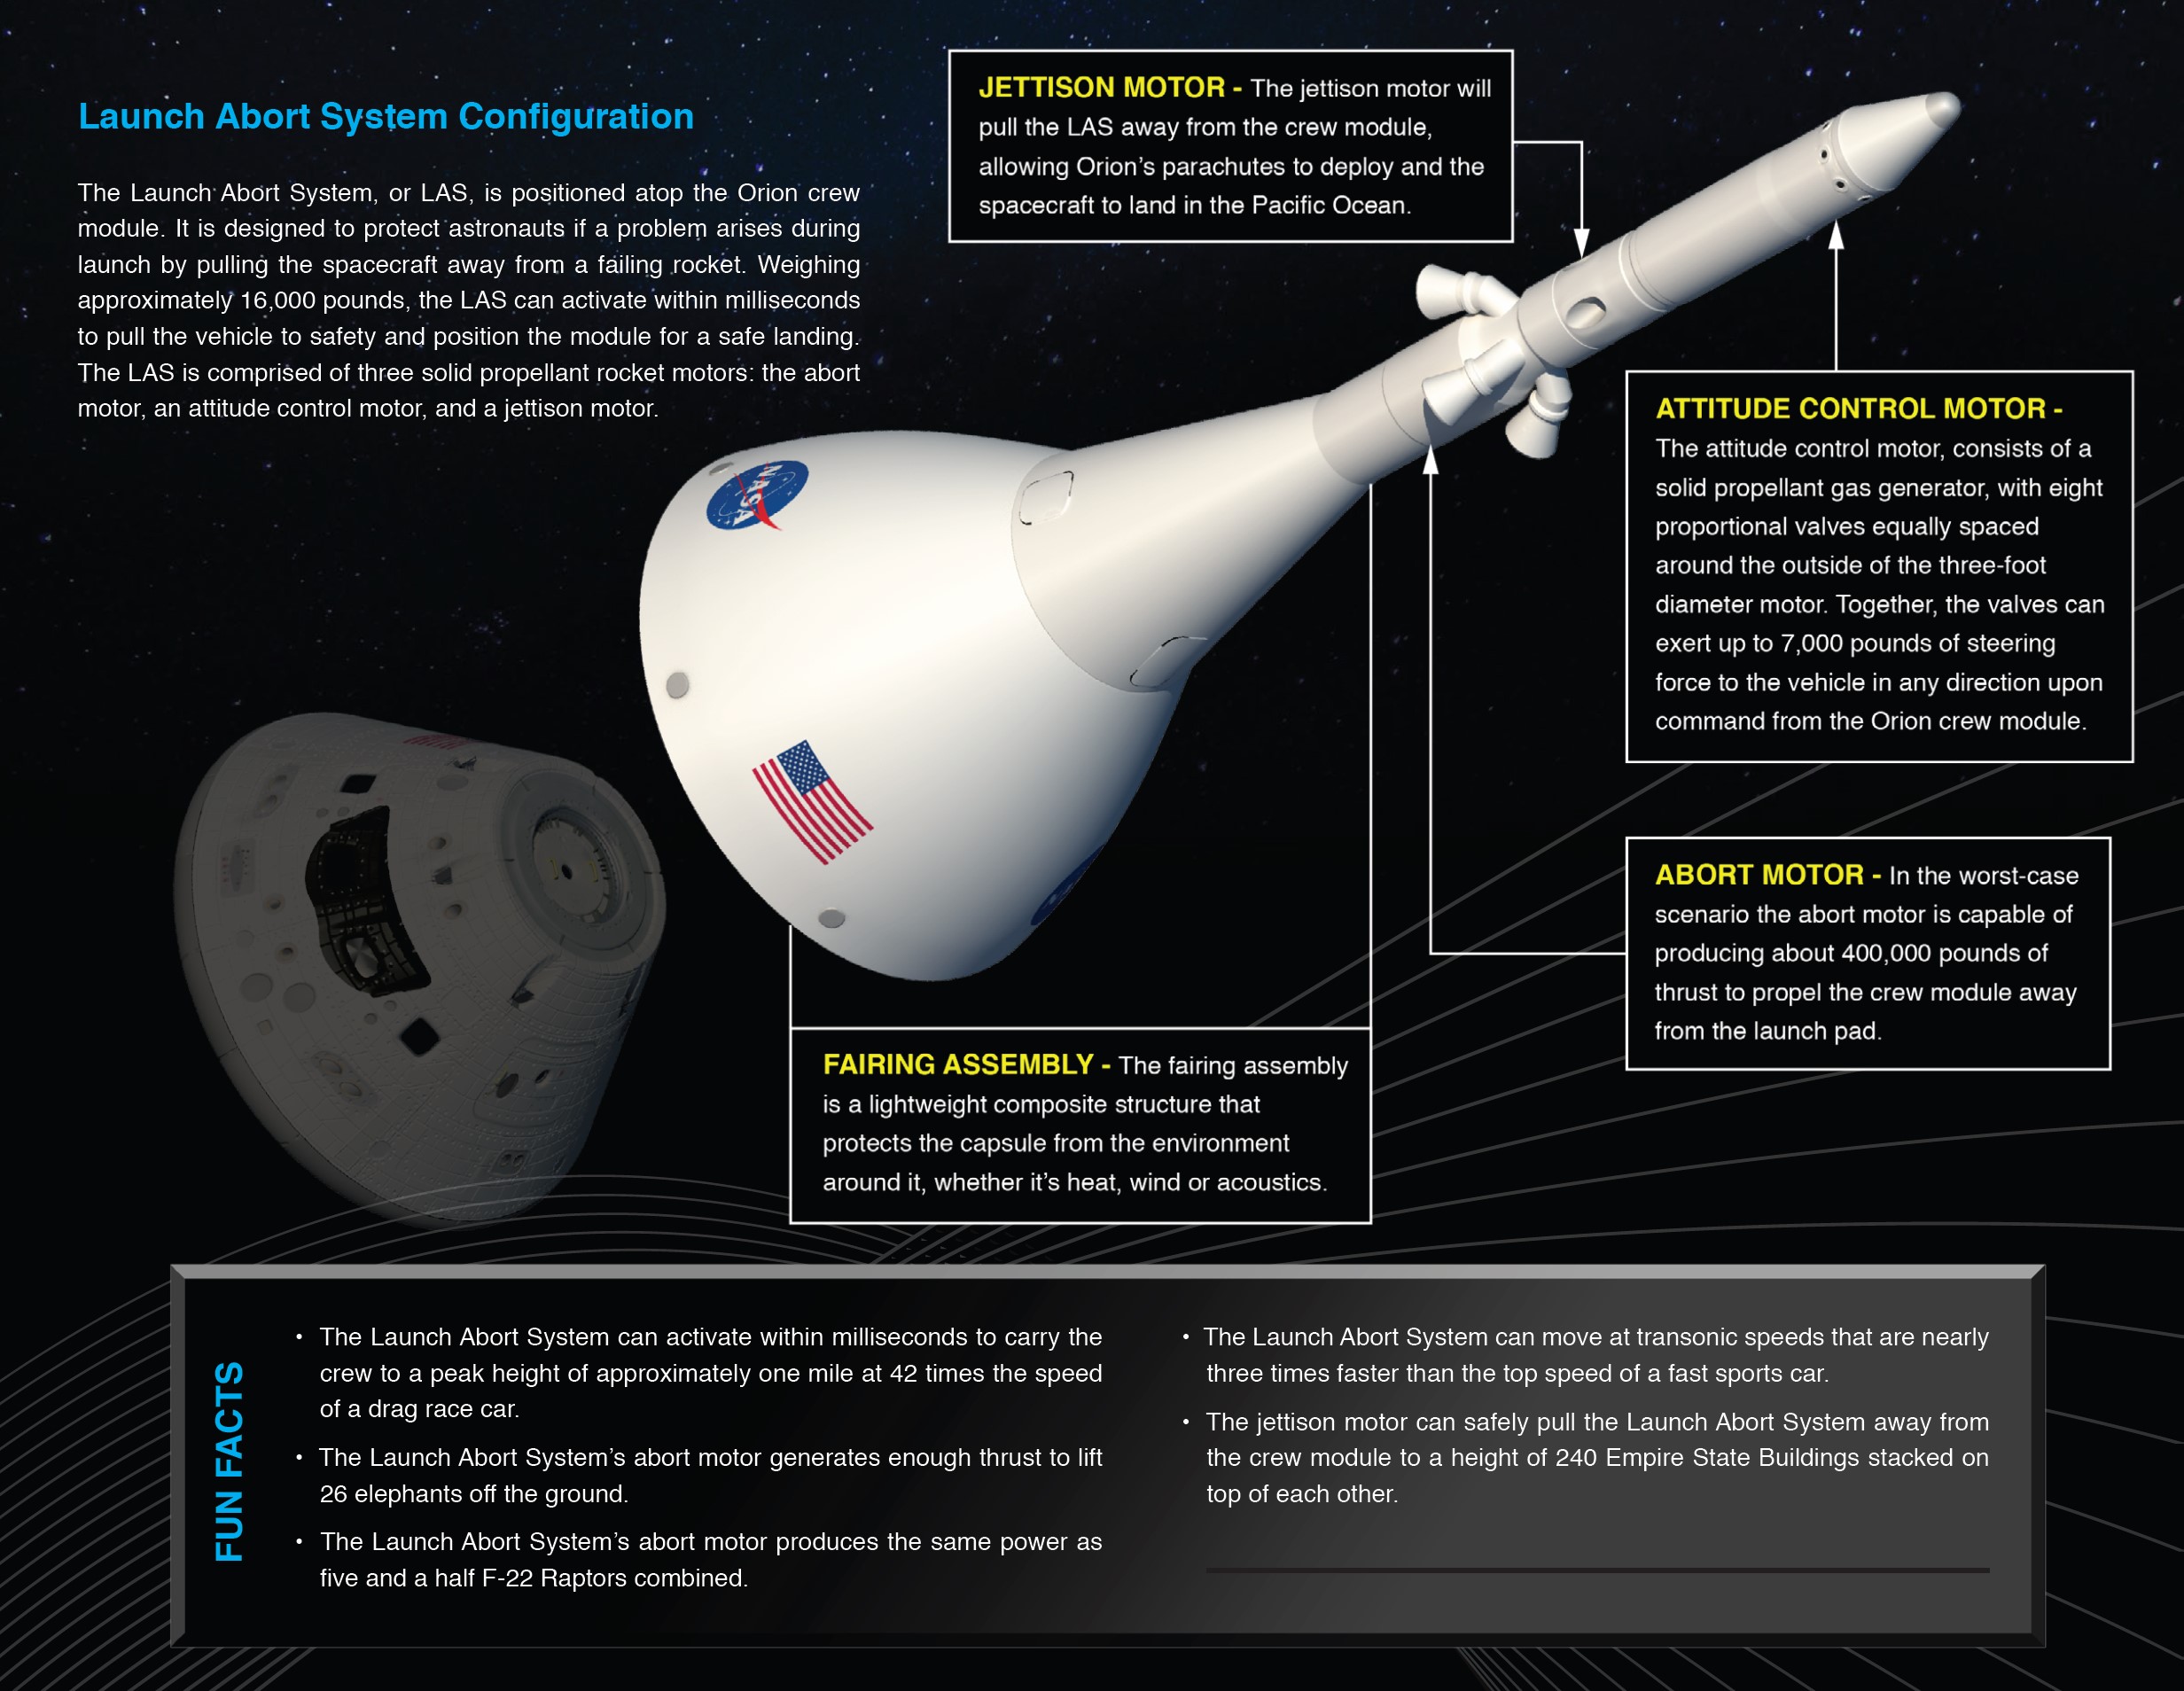 Charotar Globe Daily A fact sheet illustrating NASA's Launch Abort System for the Orion Spacecraft.